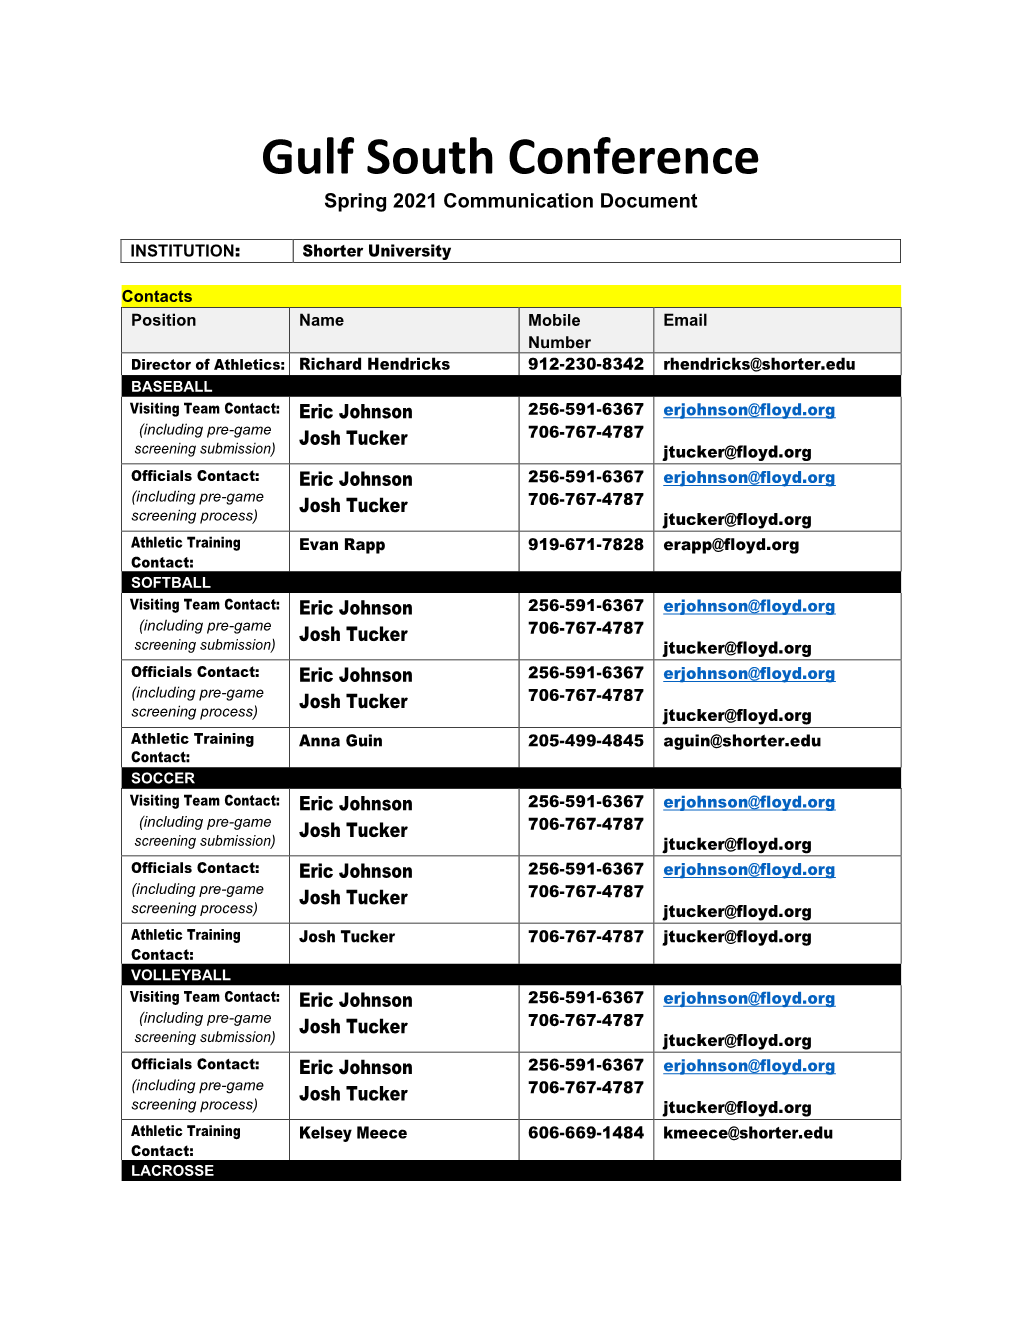 Gulf South Conference Spring 2021 Communication Document